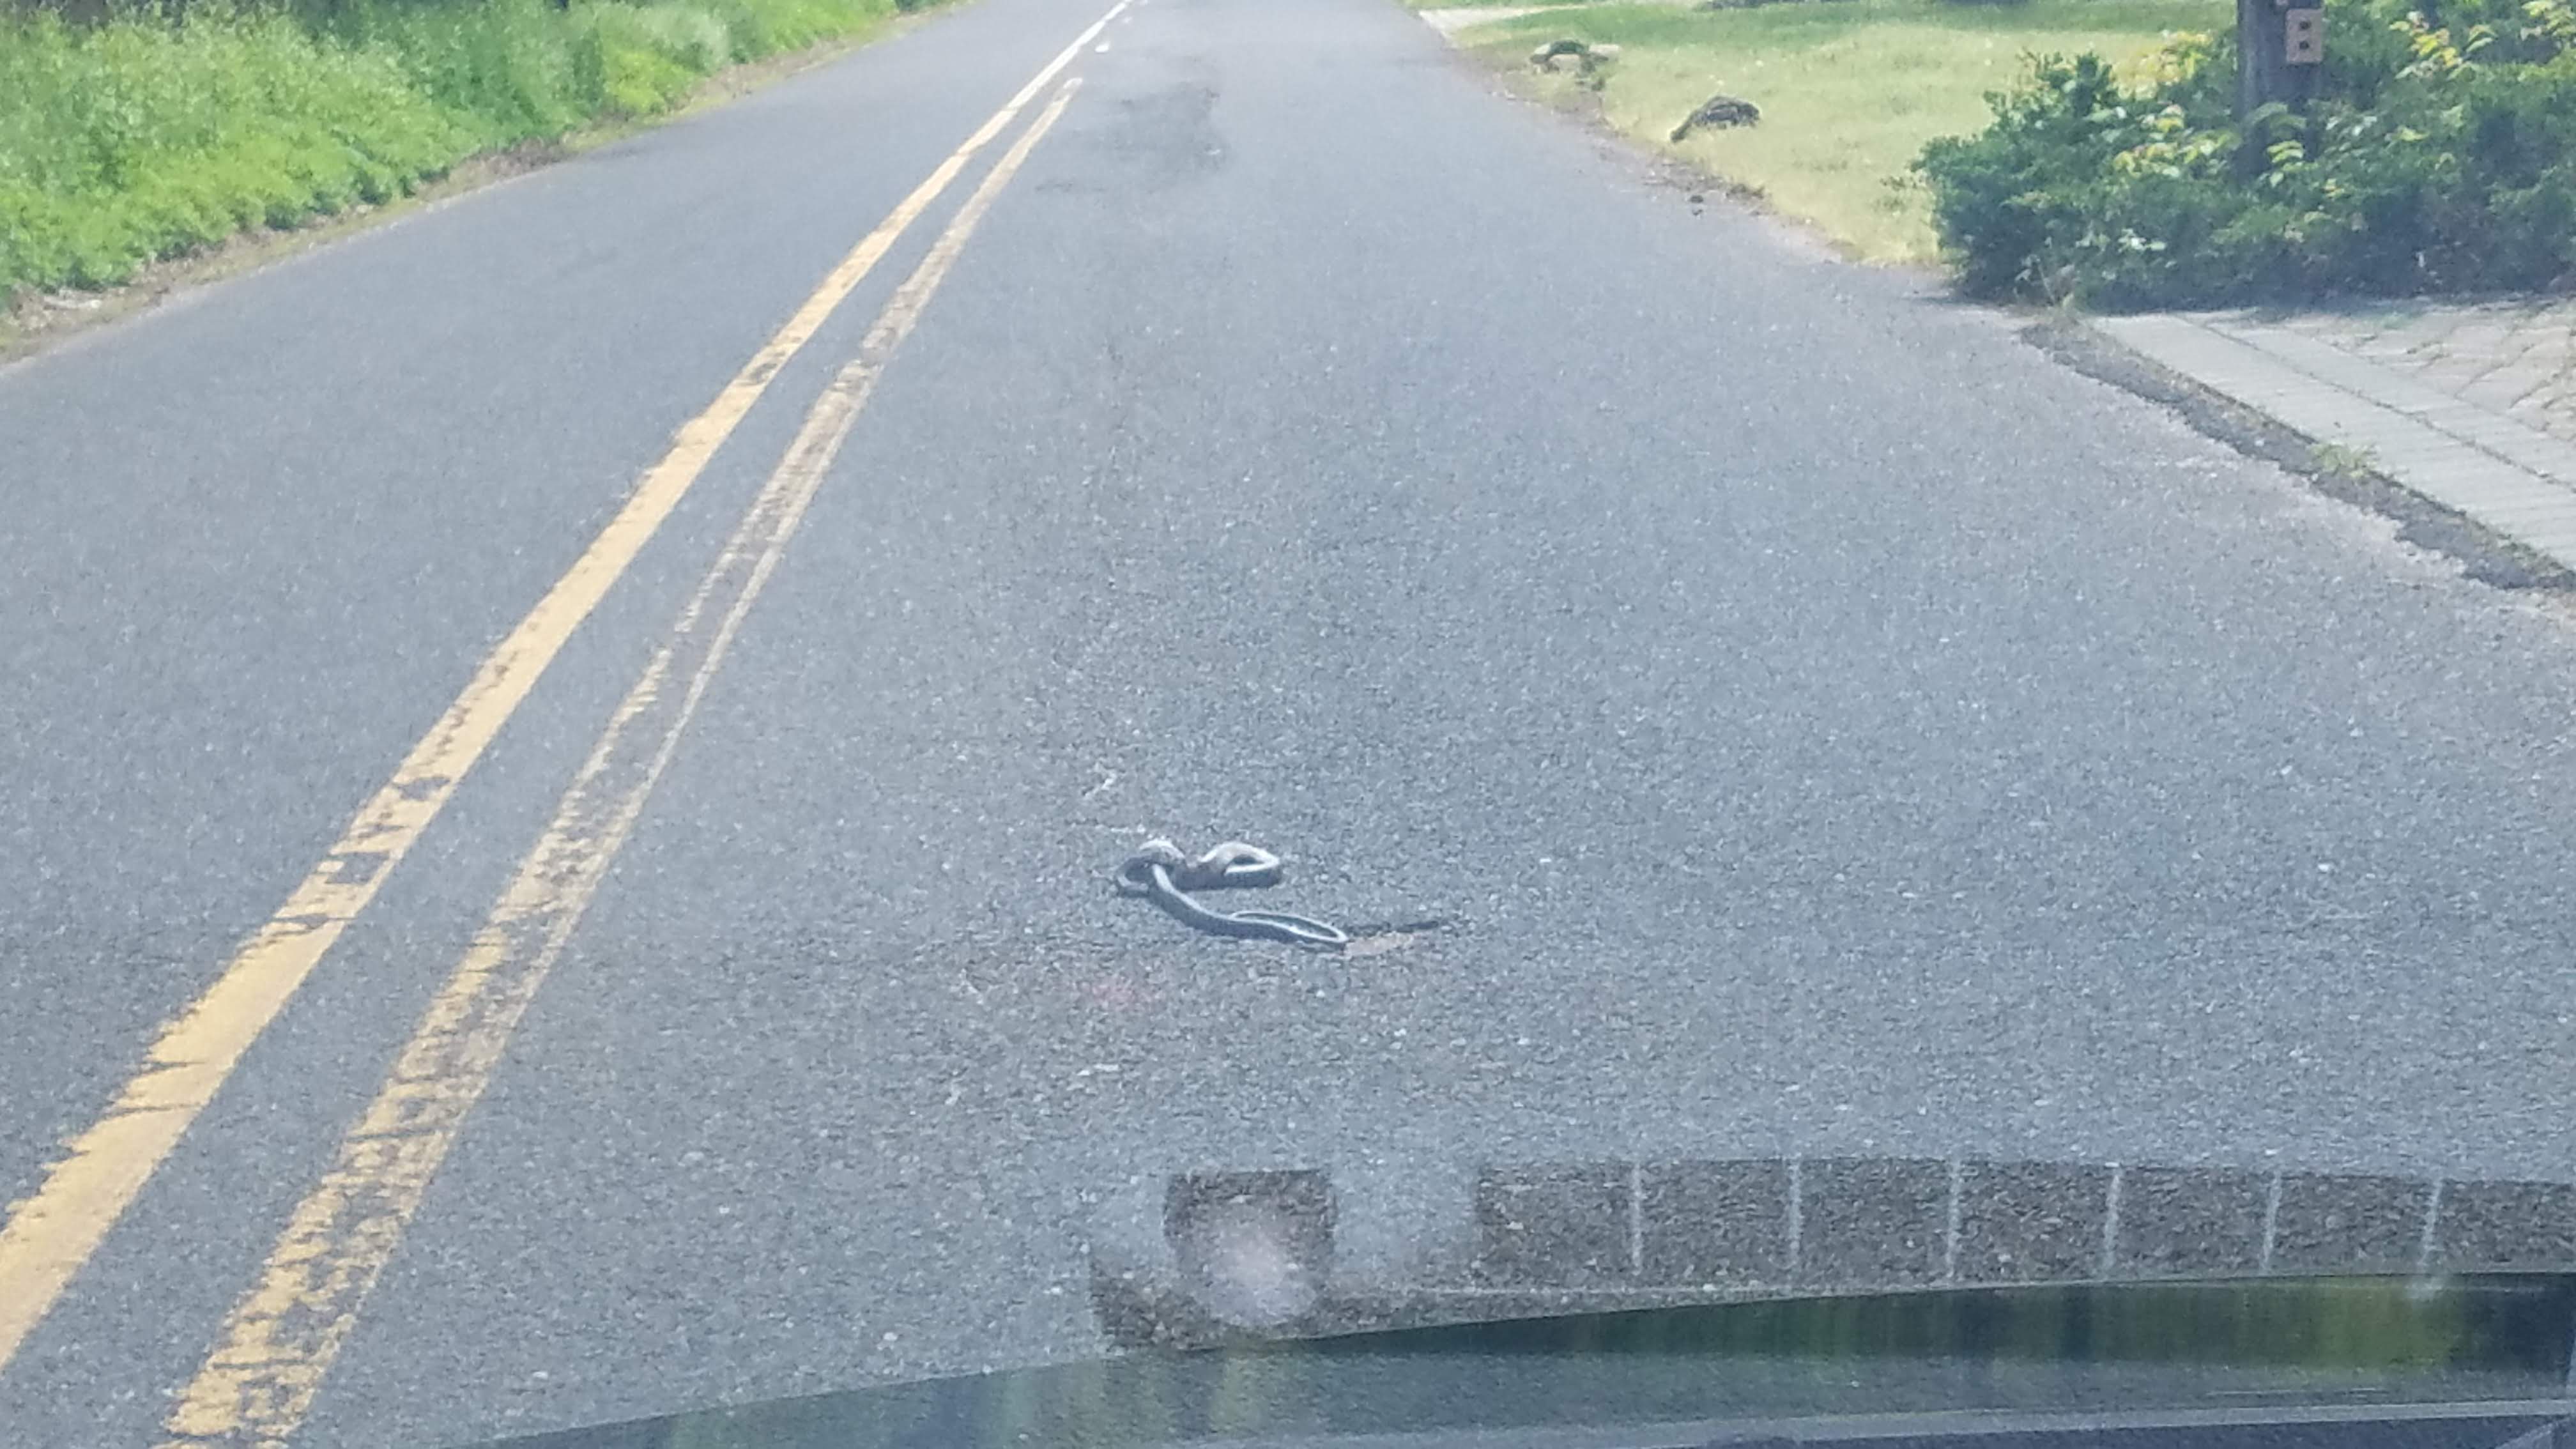 Snake in the road